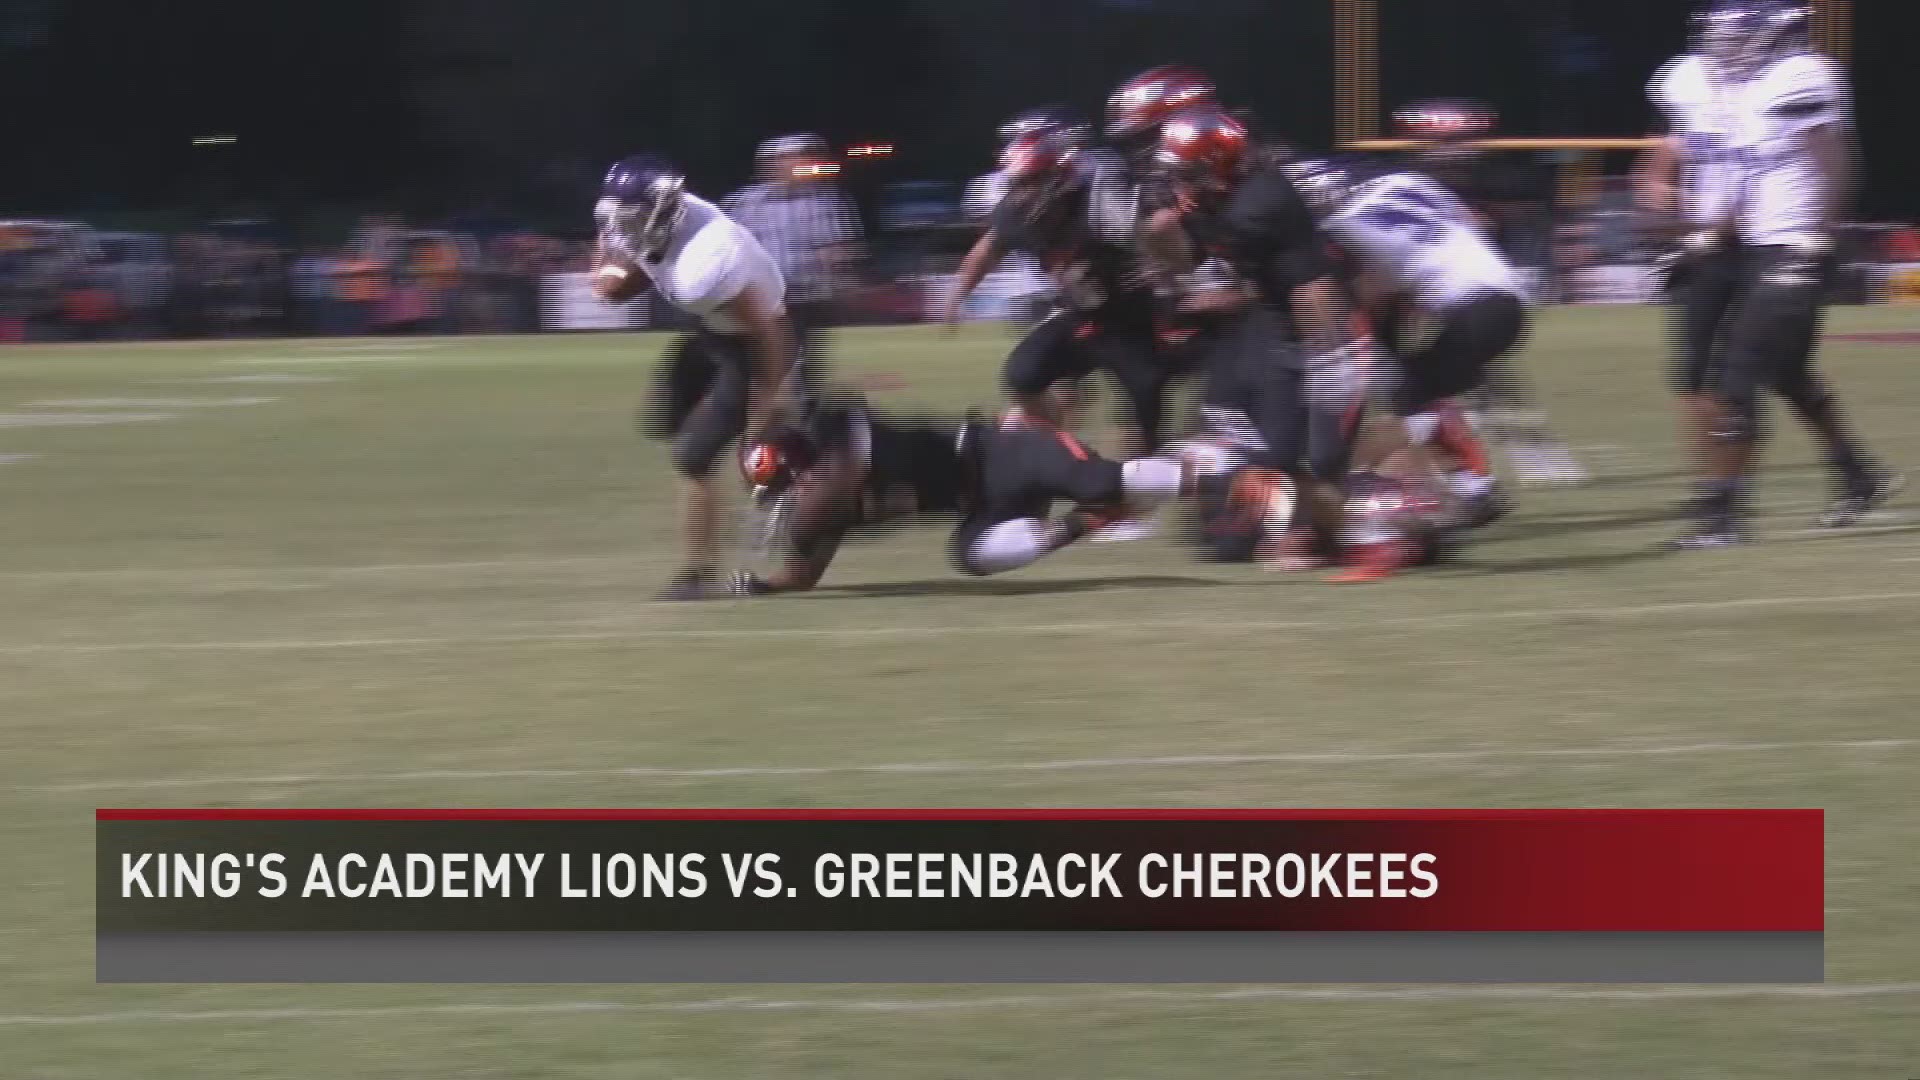 Greenback holds off TKA to stay undefeated this season.